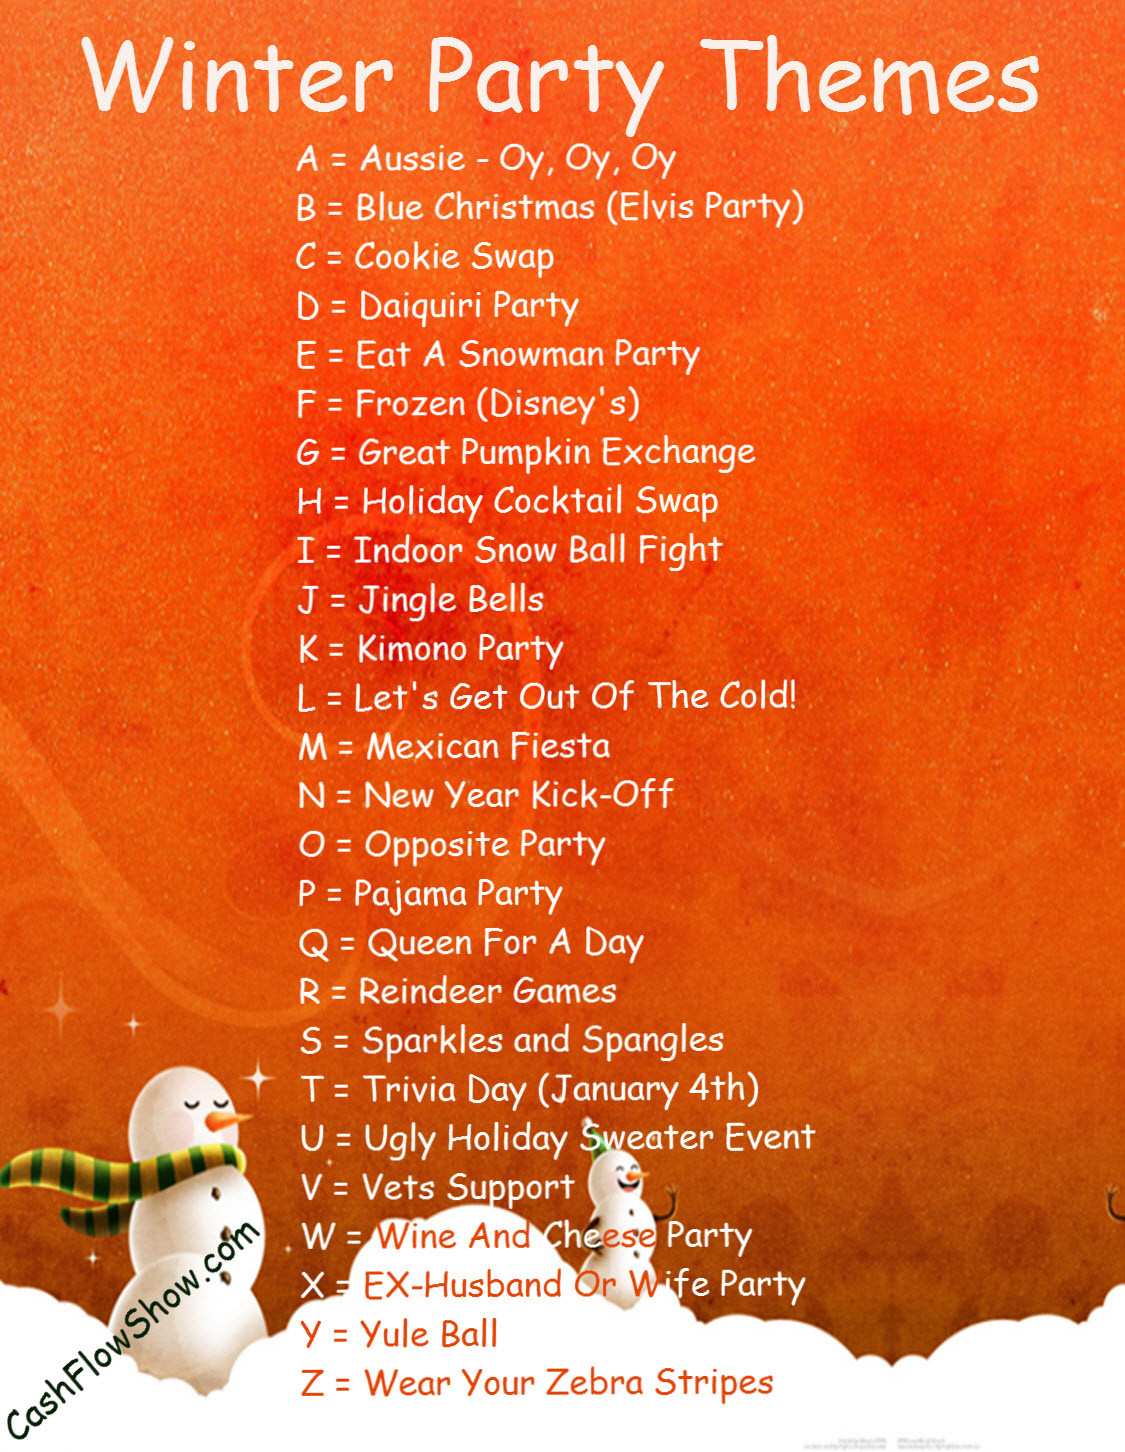 Funny Christmas Theme Party Ideas
 Read A Z List To Find A Winter Party Theme For Your Event